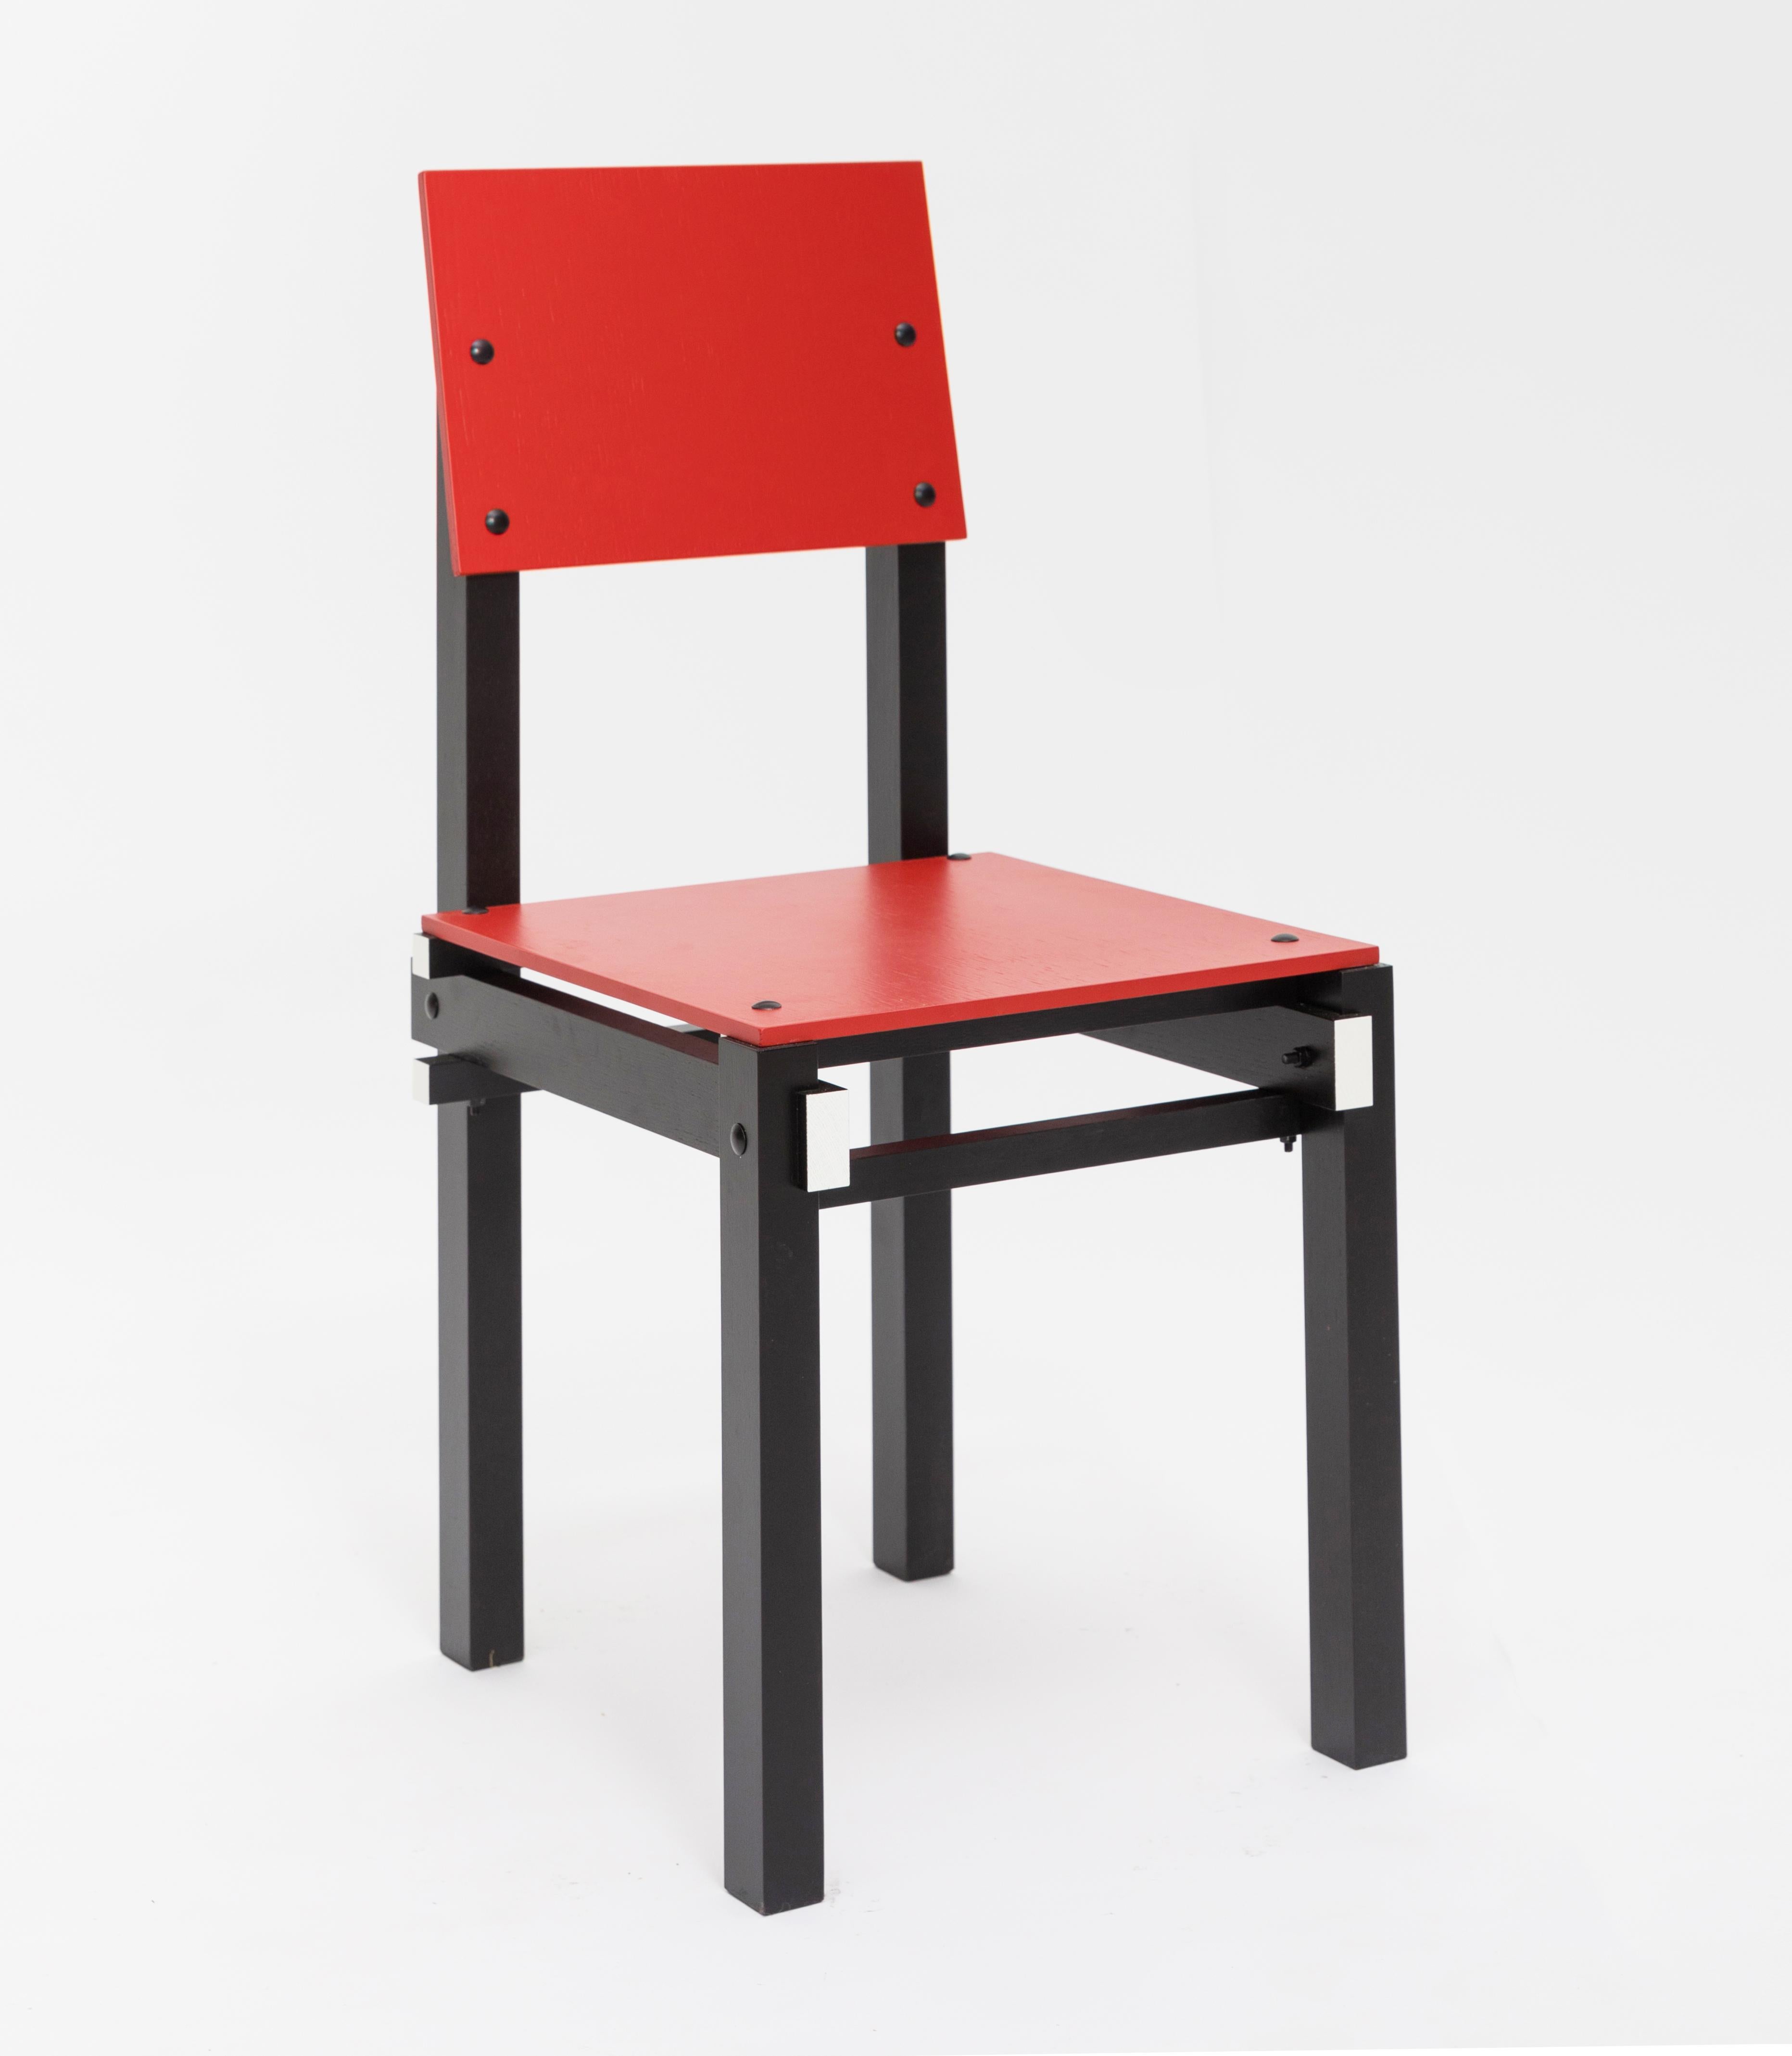 Chair

The Rietveld military furniture was designed in 1923 by Gerrit Rietveld for a Catholic Military Home in Utrecht, the Netherlands. The Military series was the first to use nuts and bolts instead of wooden dowels. The military furniture was